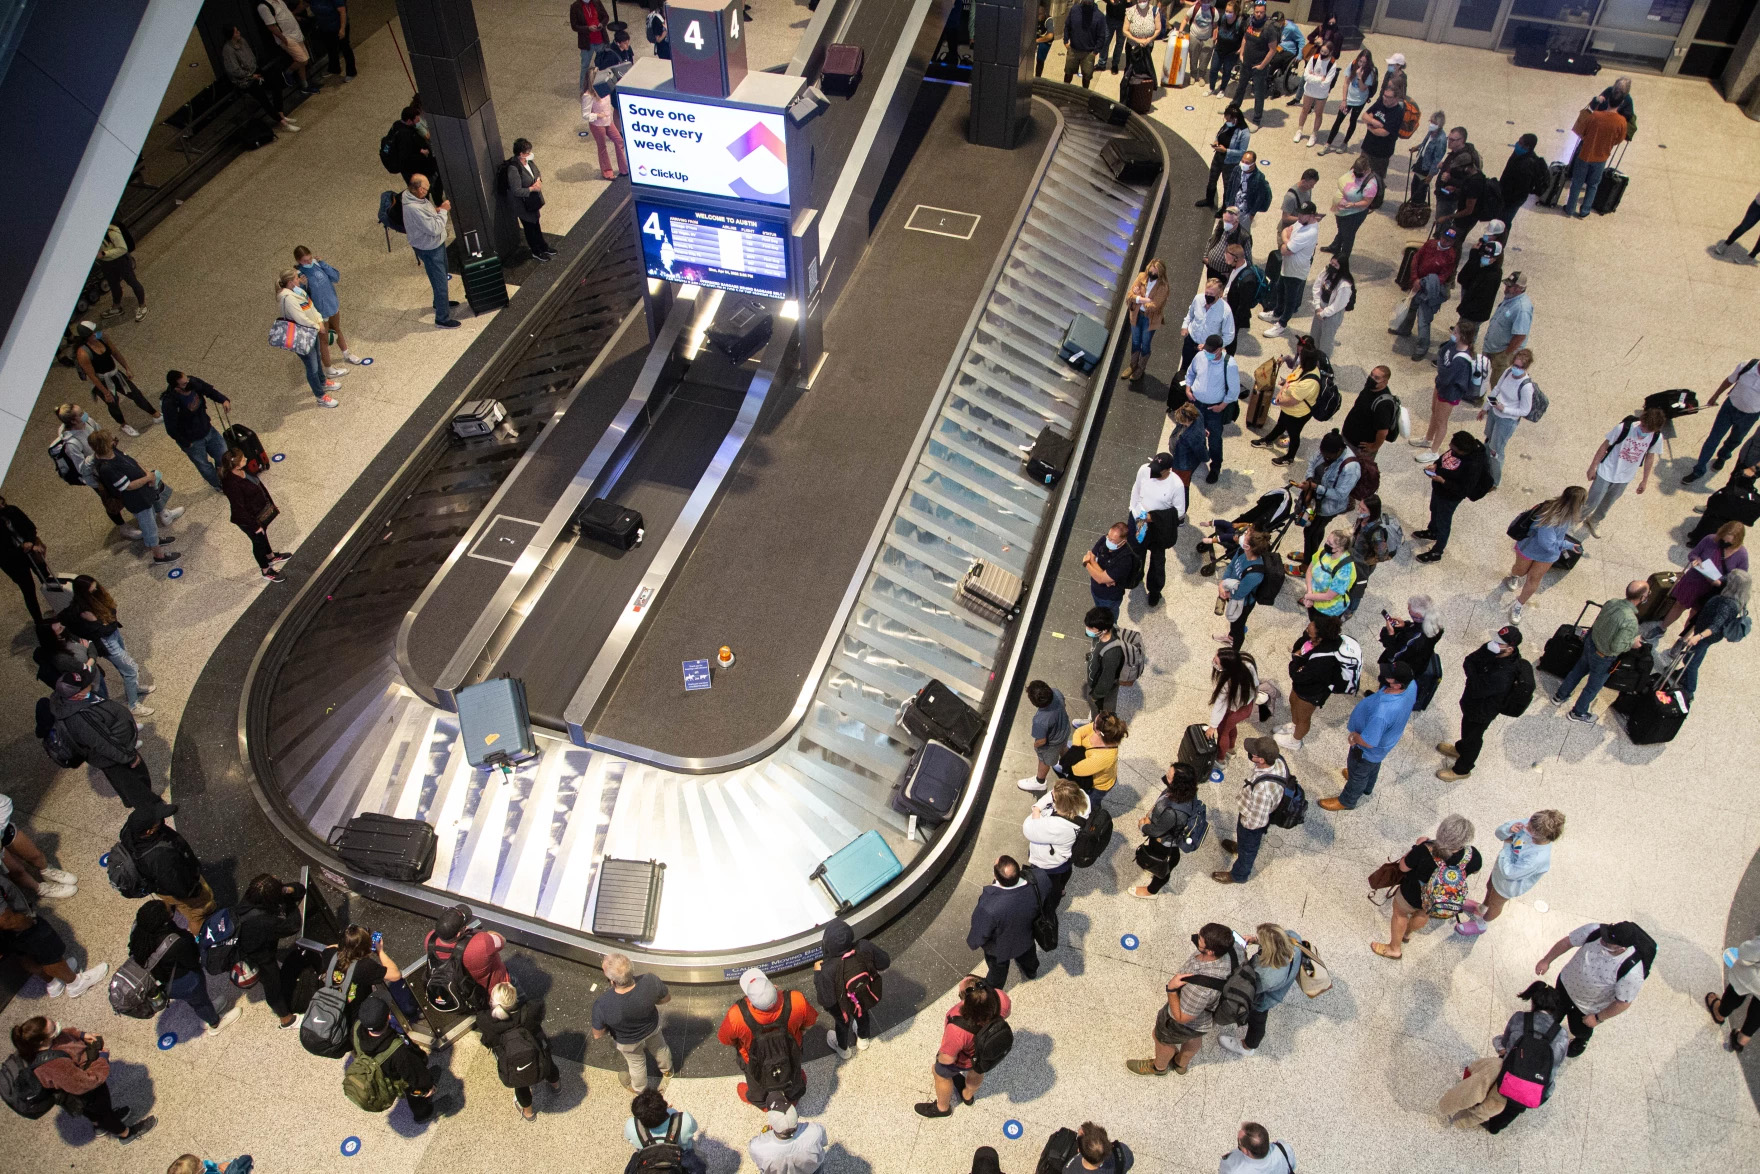 A crowd of people gathered around the baggage claim conveyor belts of an airport are seen from above.